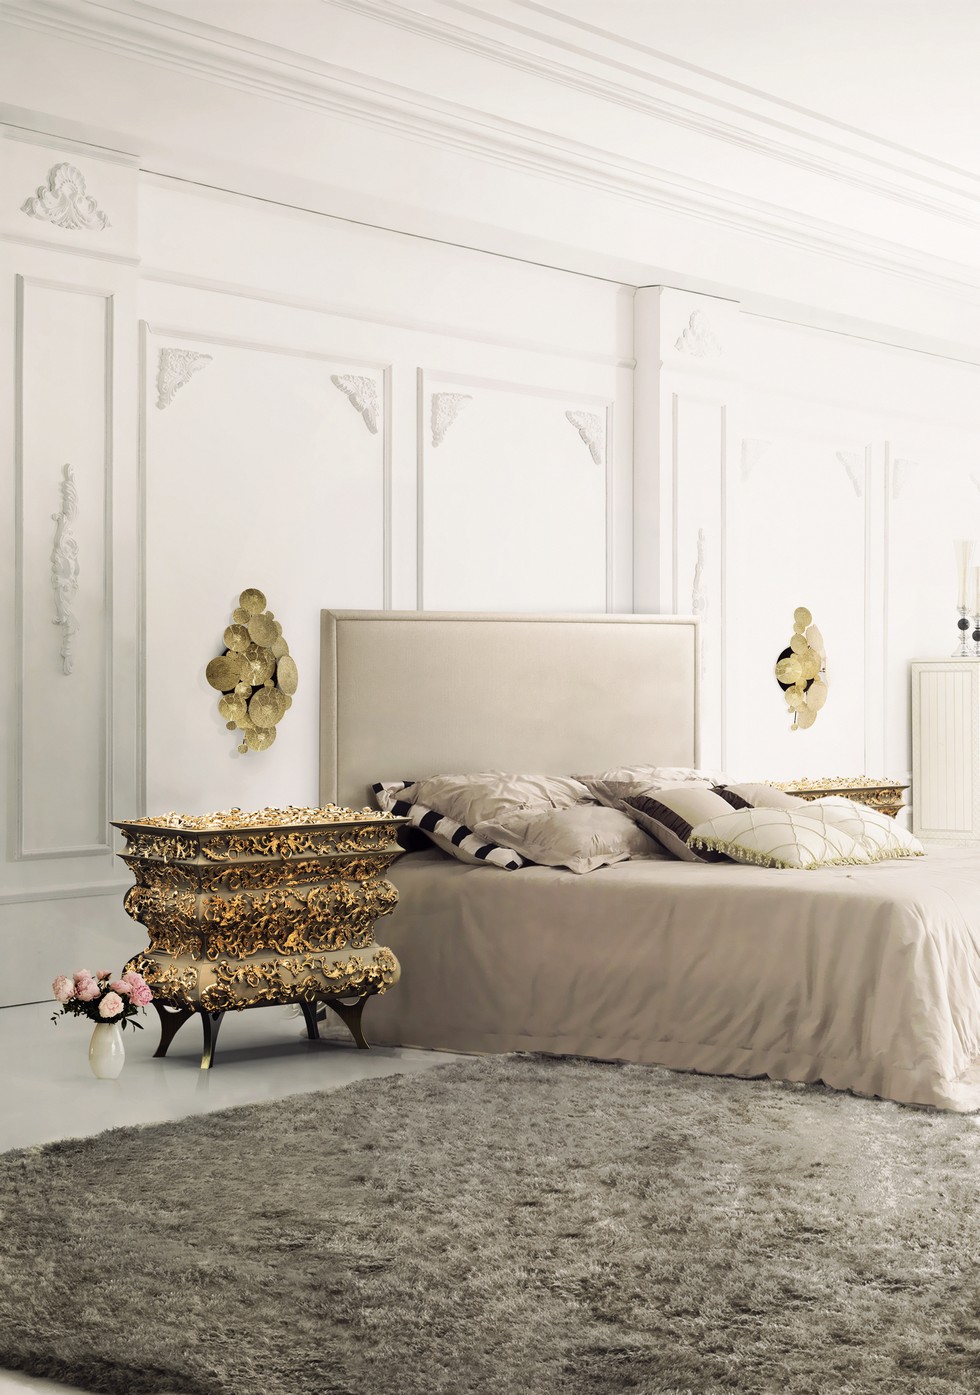 MARVELOUS BEDROOMS IDEAS WITH SOPHISTICATED NIGHTSTANDS AND SIDE TABLES